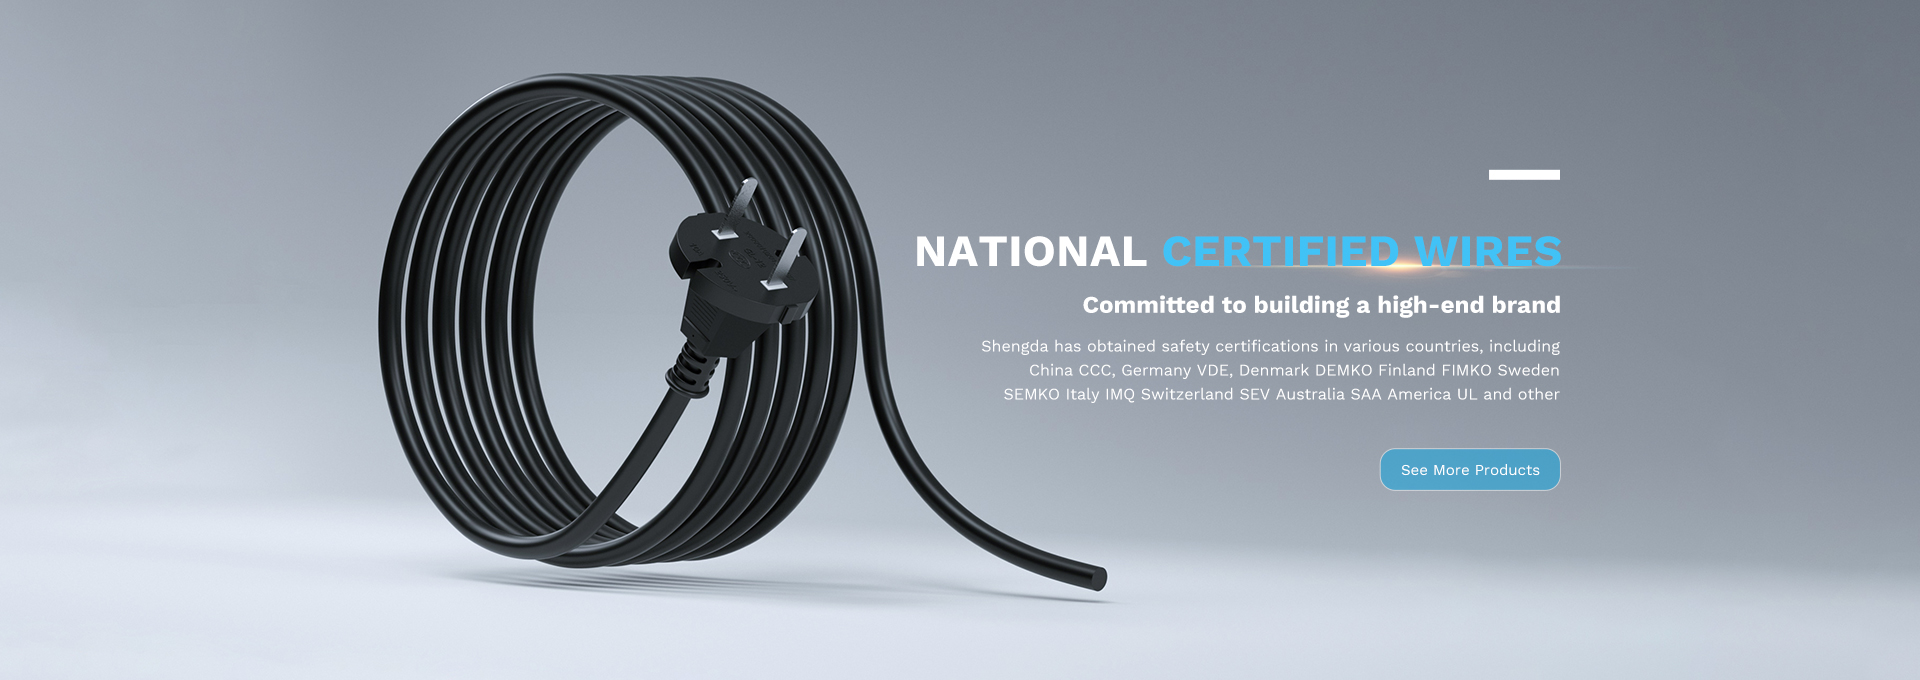 Nationally certified wires